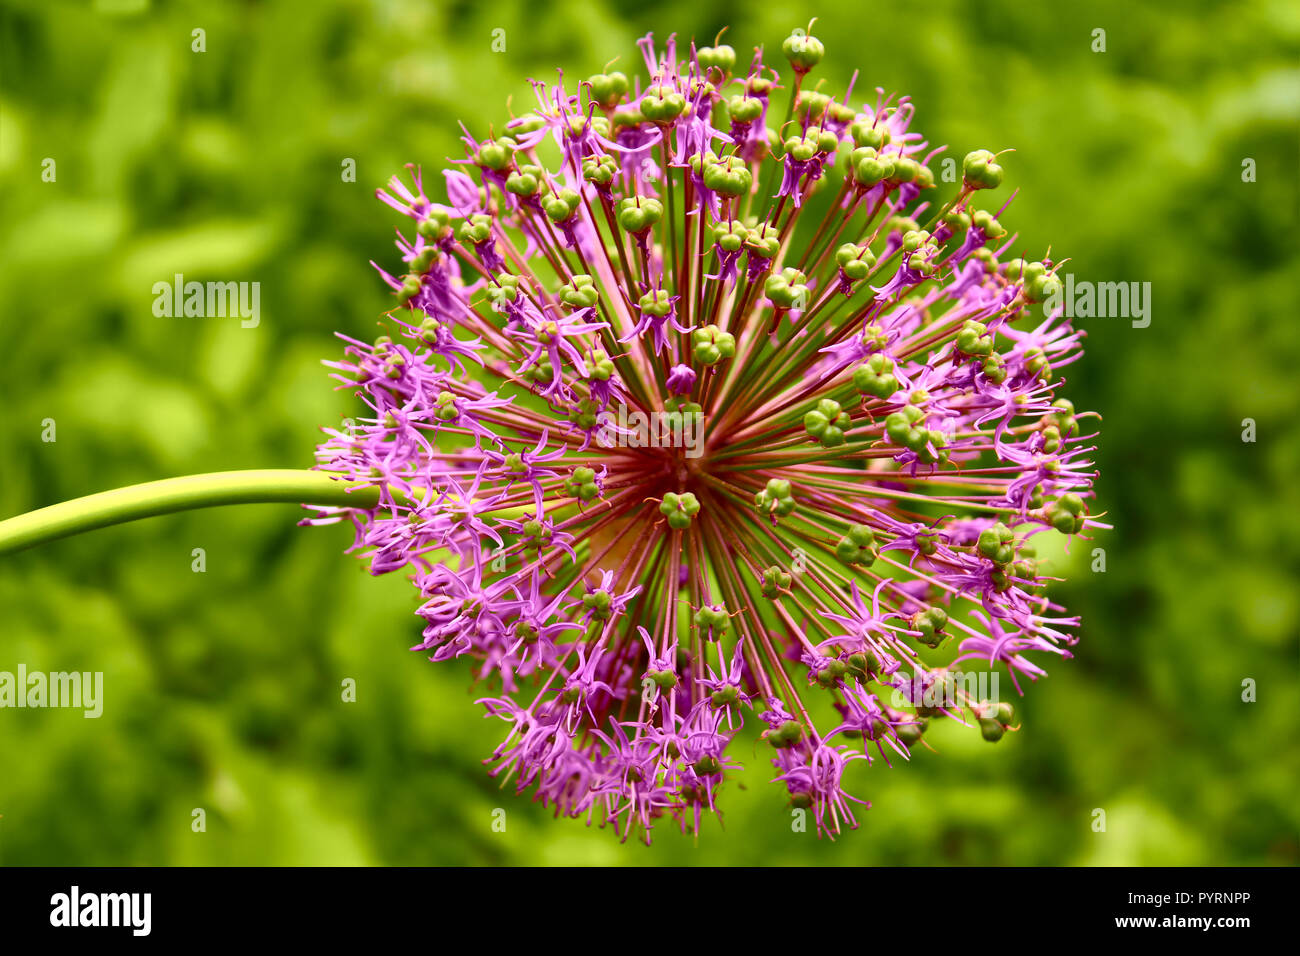 Inflorescence of allium at the end of flowering period Stock Photo